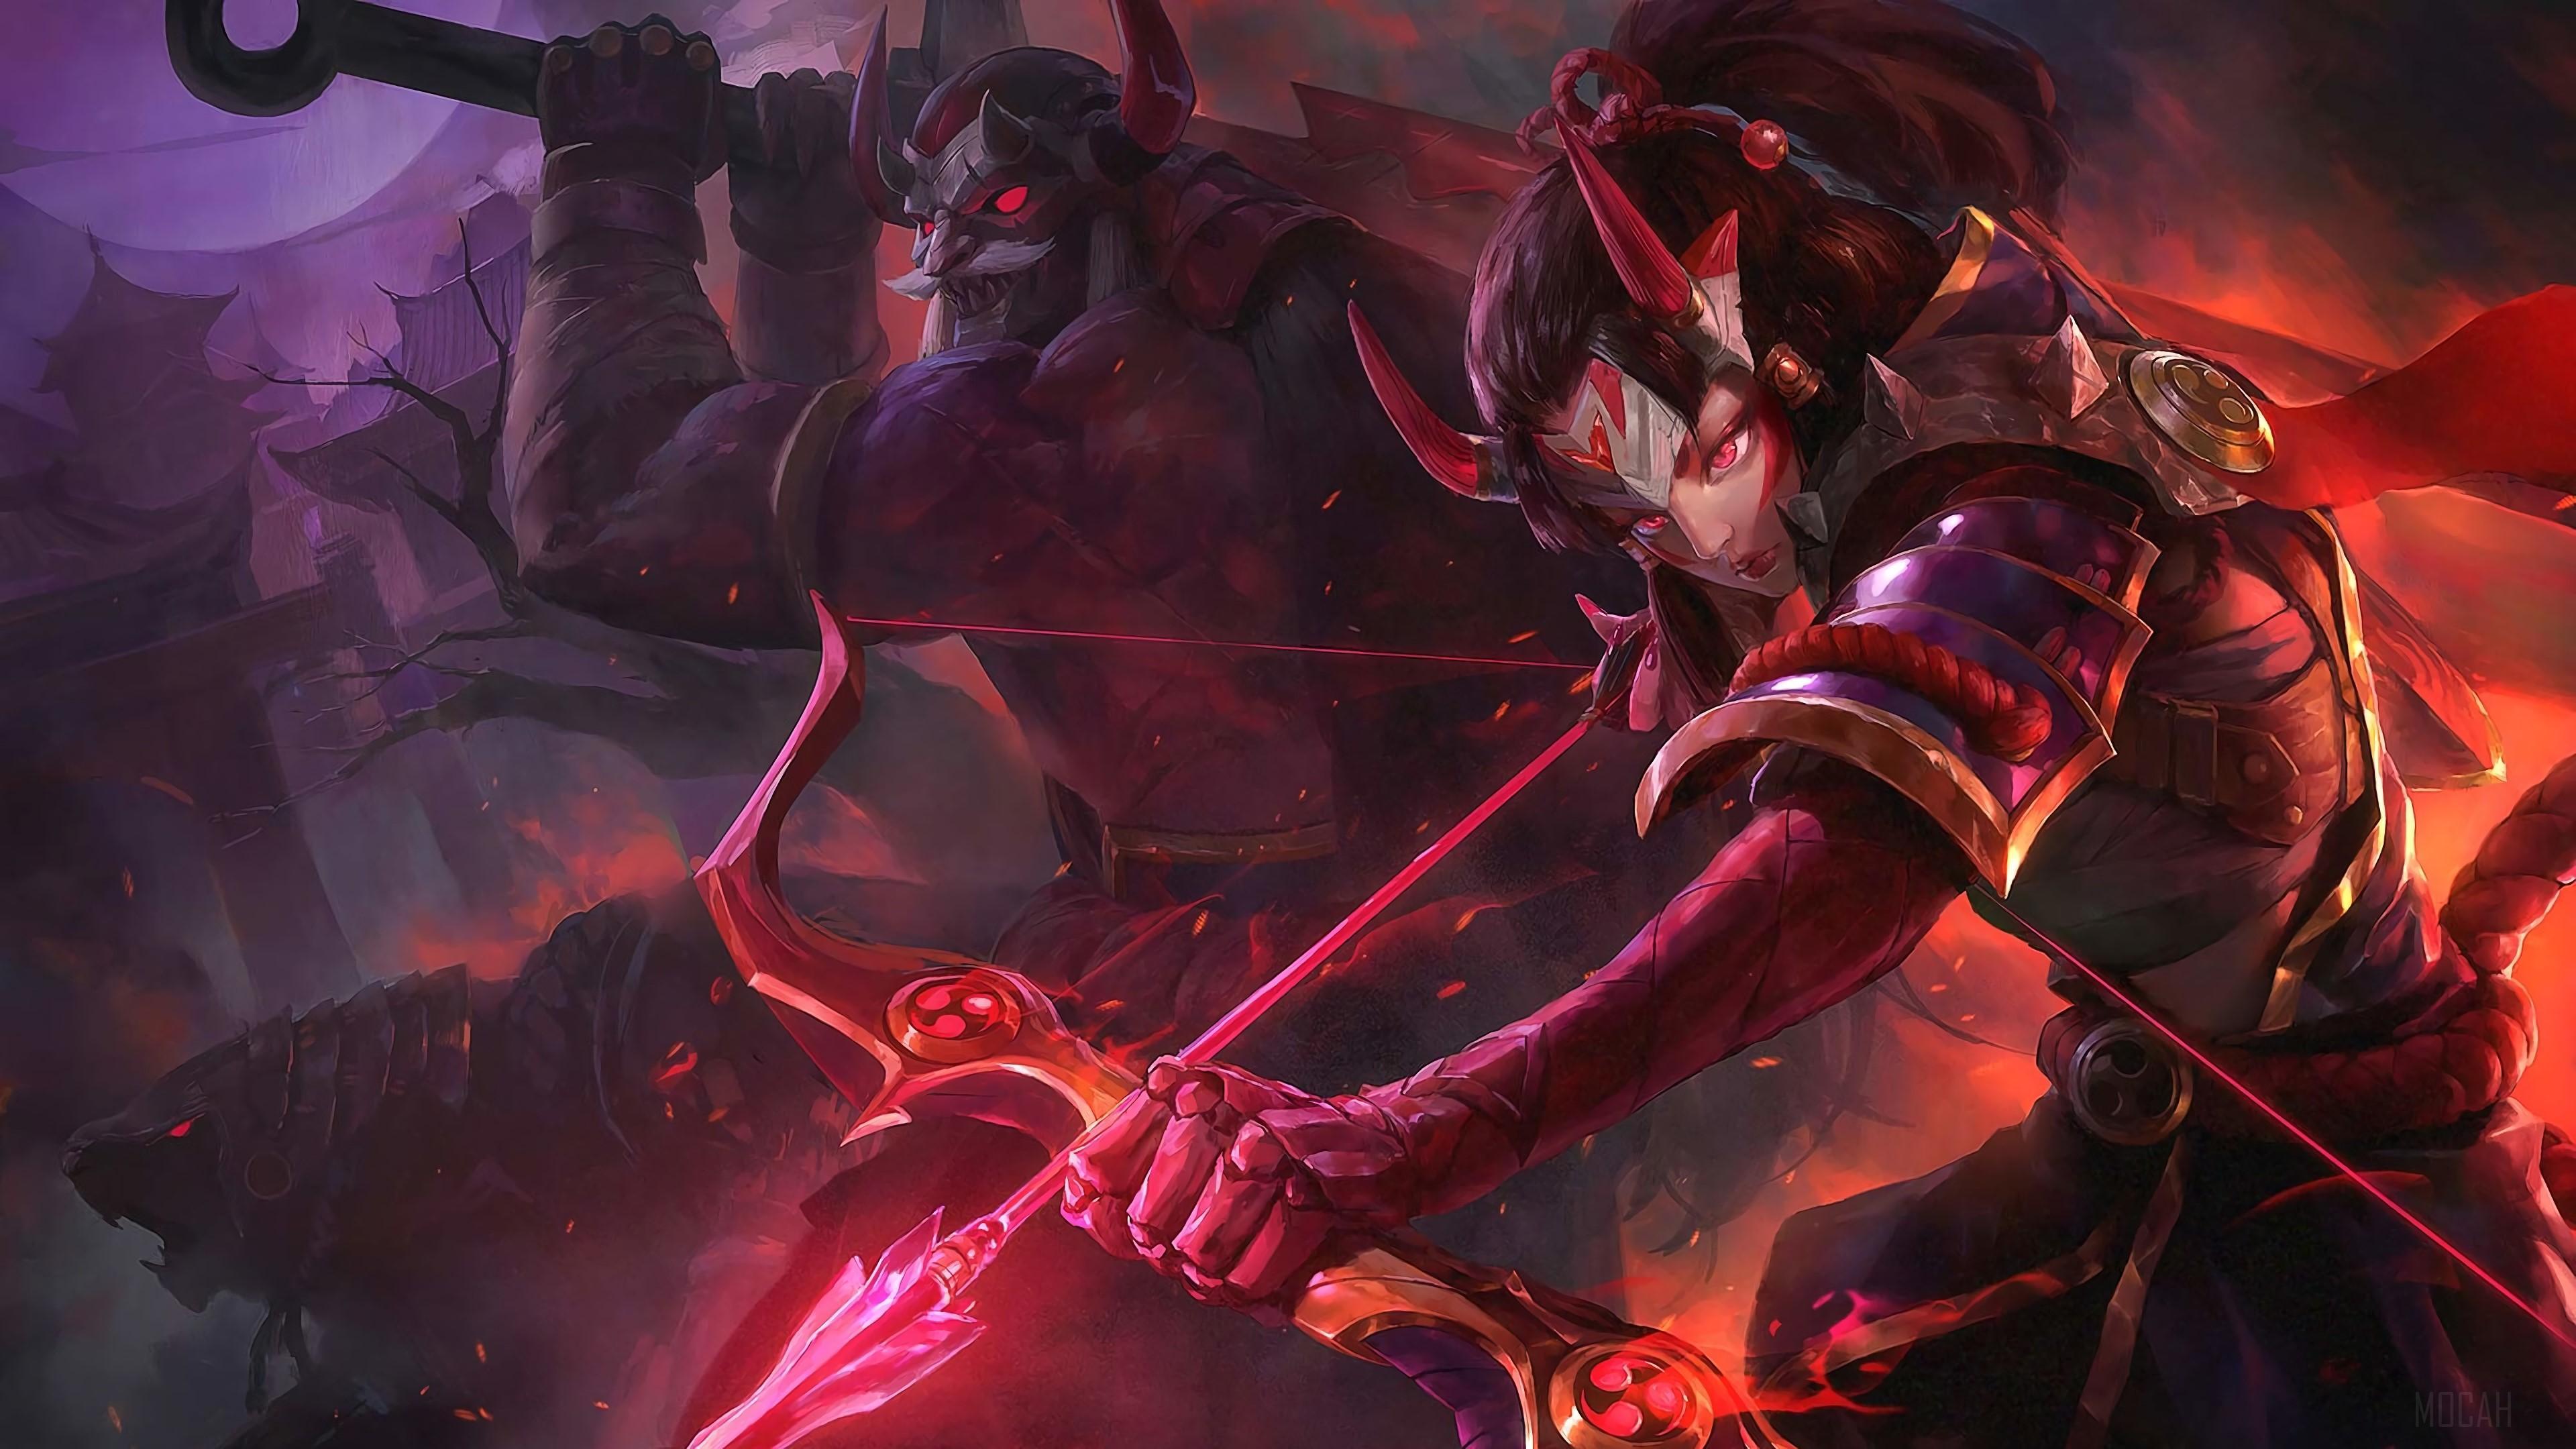 HD wallpaper, Blood Moon Ashe And Tryndamere Lol League Of Legends Lol 4K